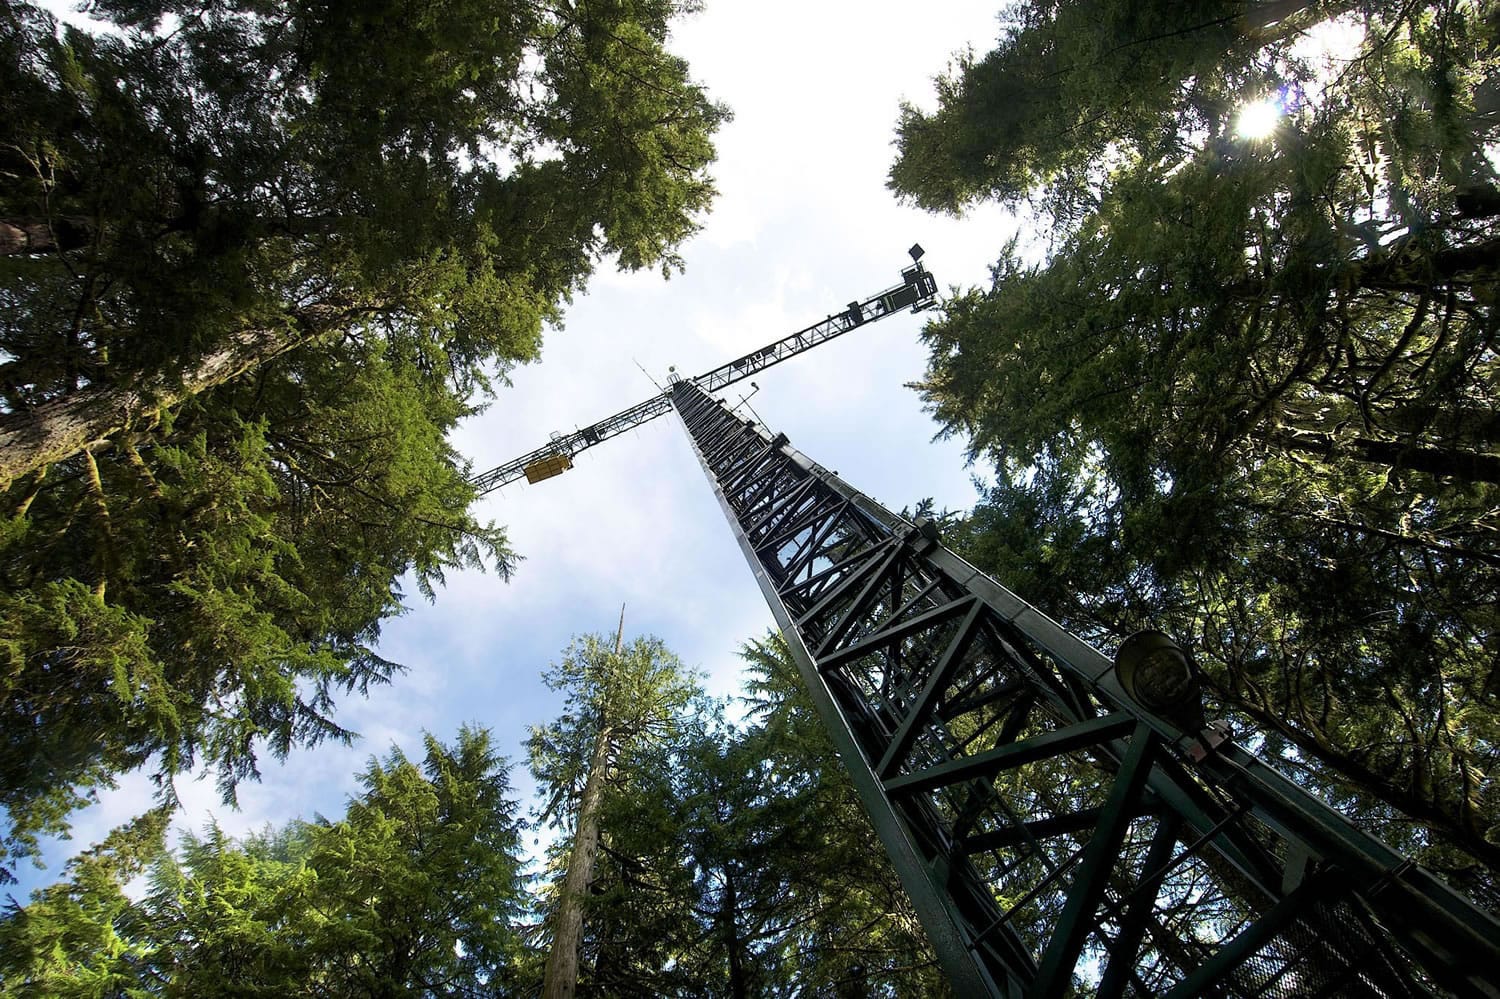 The Wind River Canopy Crane north of Carson has been retired after 16 years of service, during which it carried scientists 25 stories up into the forest canopy to learn more about how old-growth forests function.